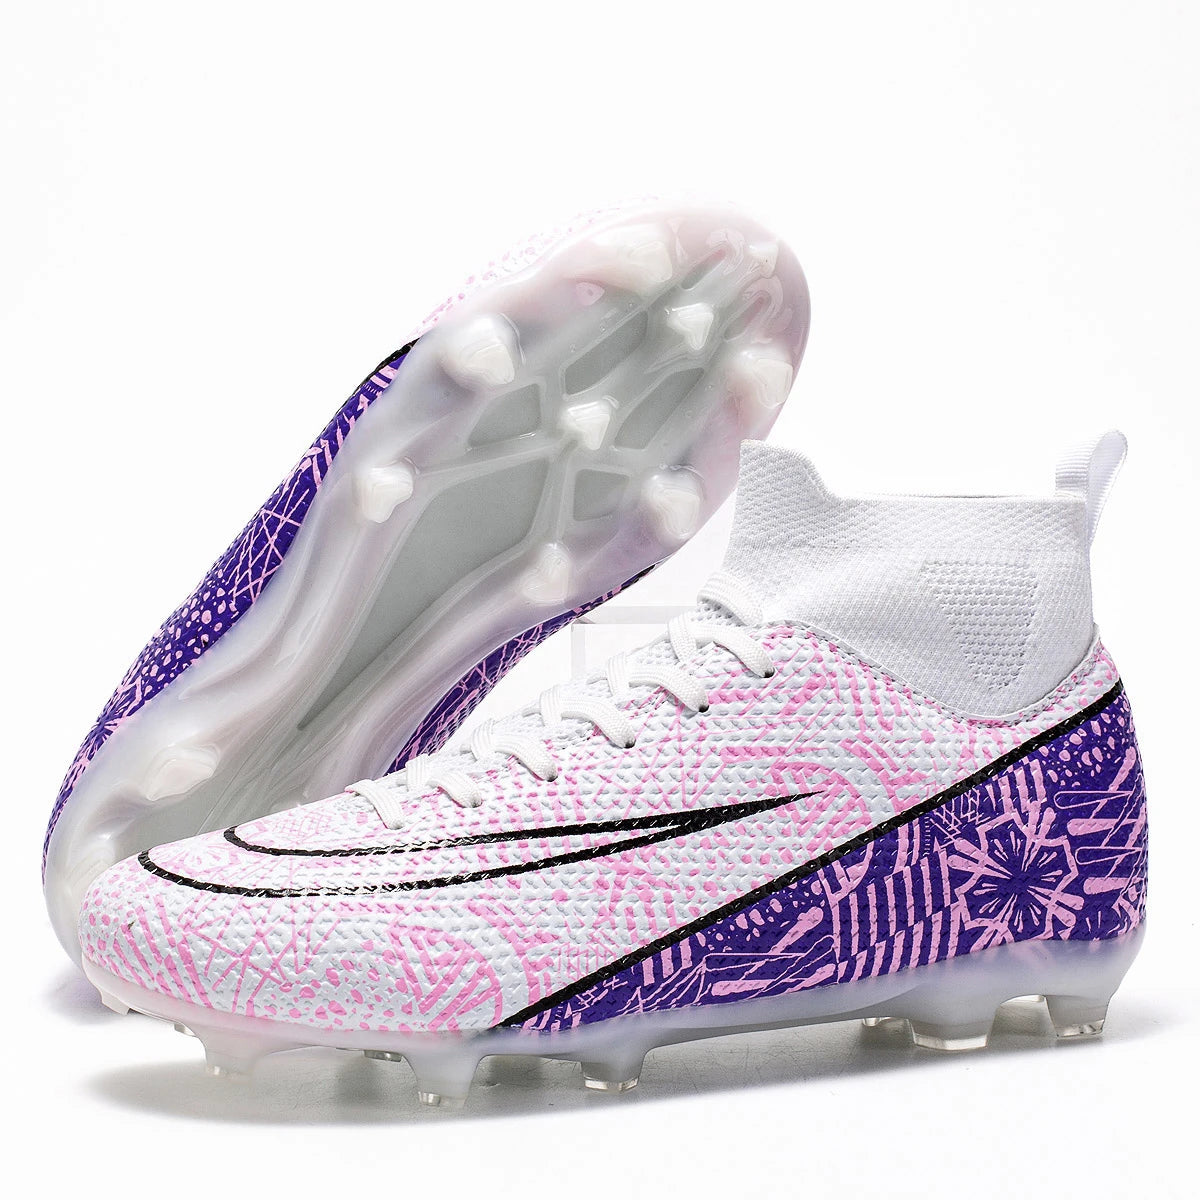 Kids / Youth High Ankle Pink Soccer Cleats for Firm Ground